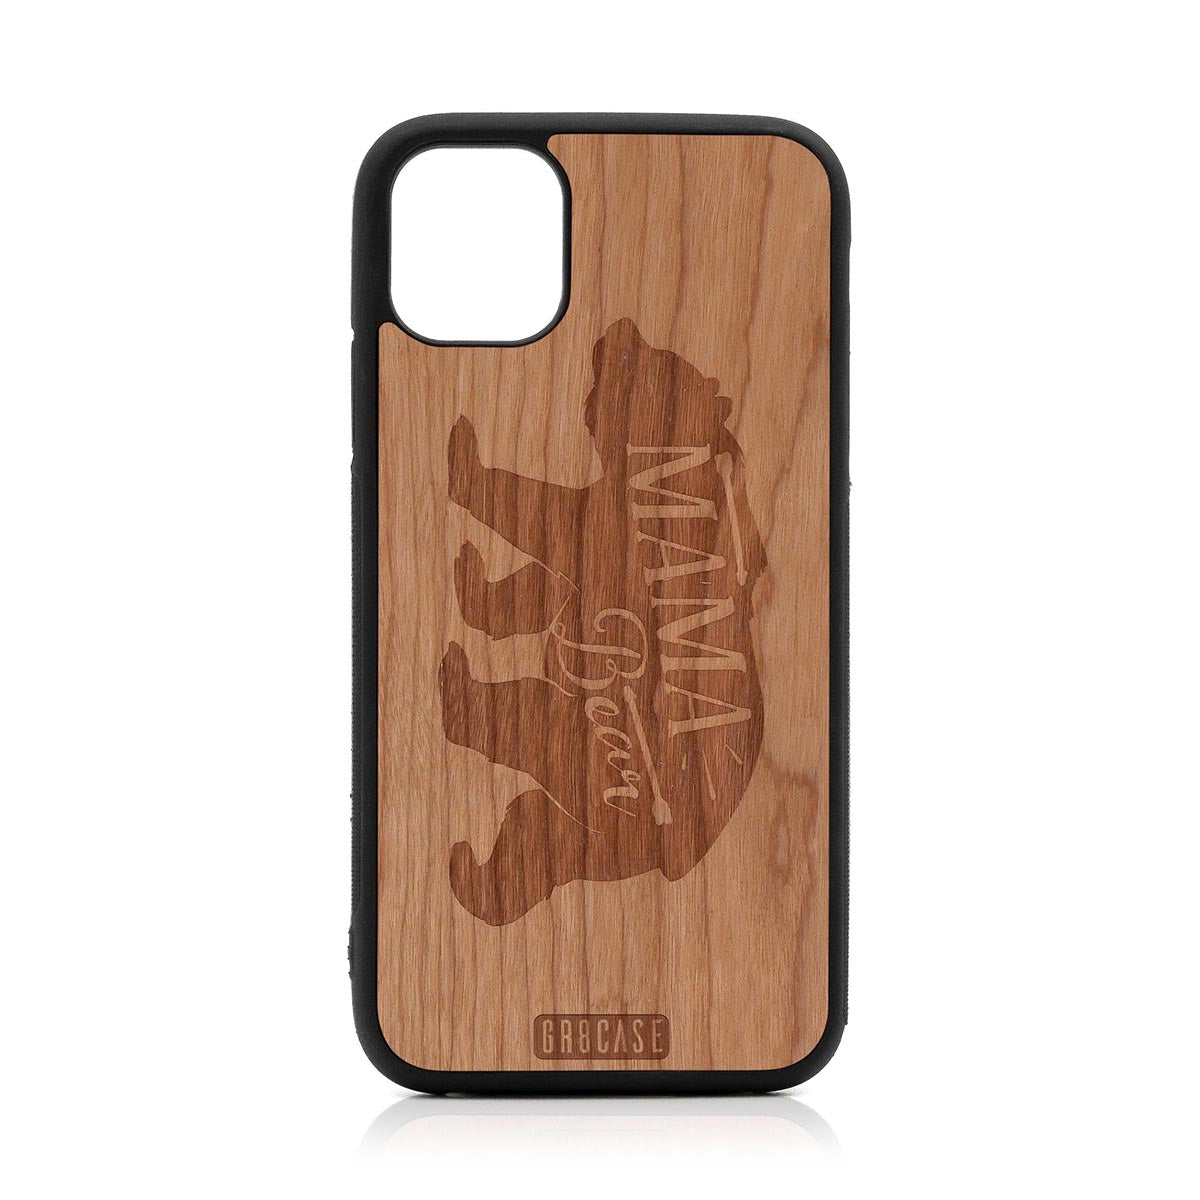 Mama Bear Design Wood Case For iPhone 11 by GR8CASE